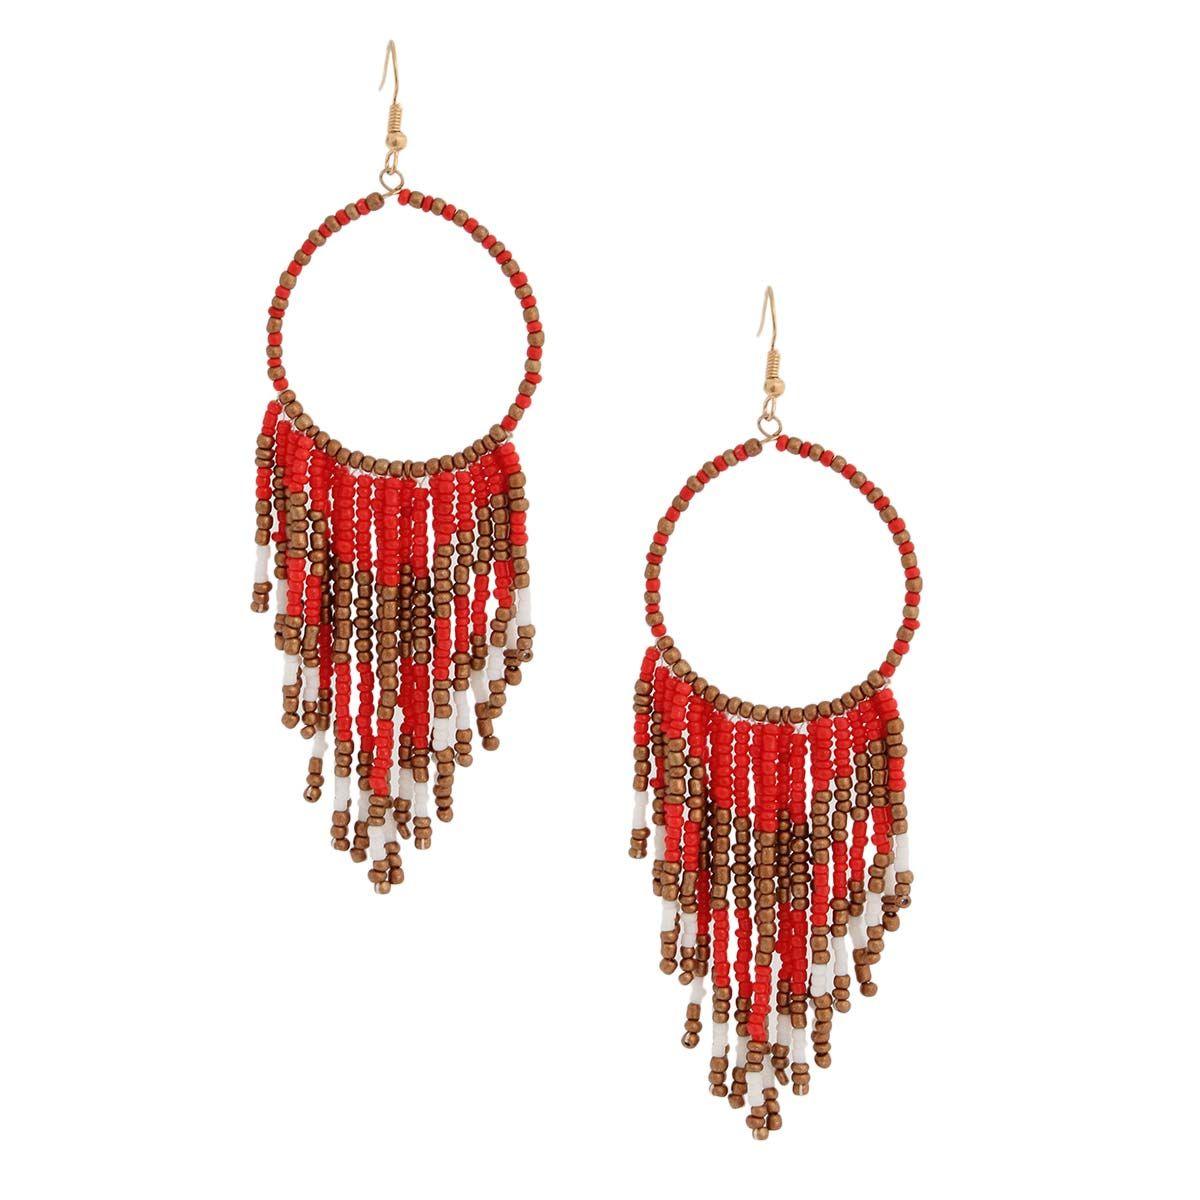 Upgrade Your Style with Stunning Red & Gold Bead Fringe Earrings